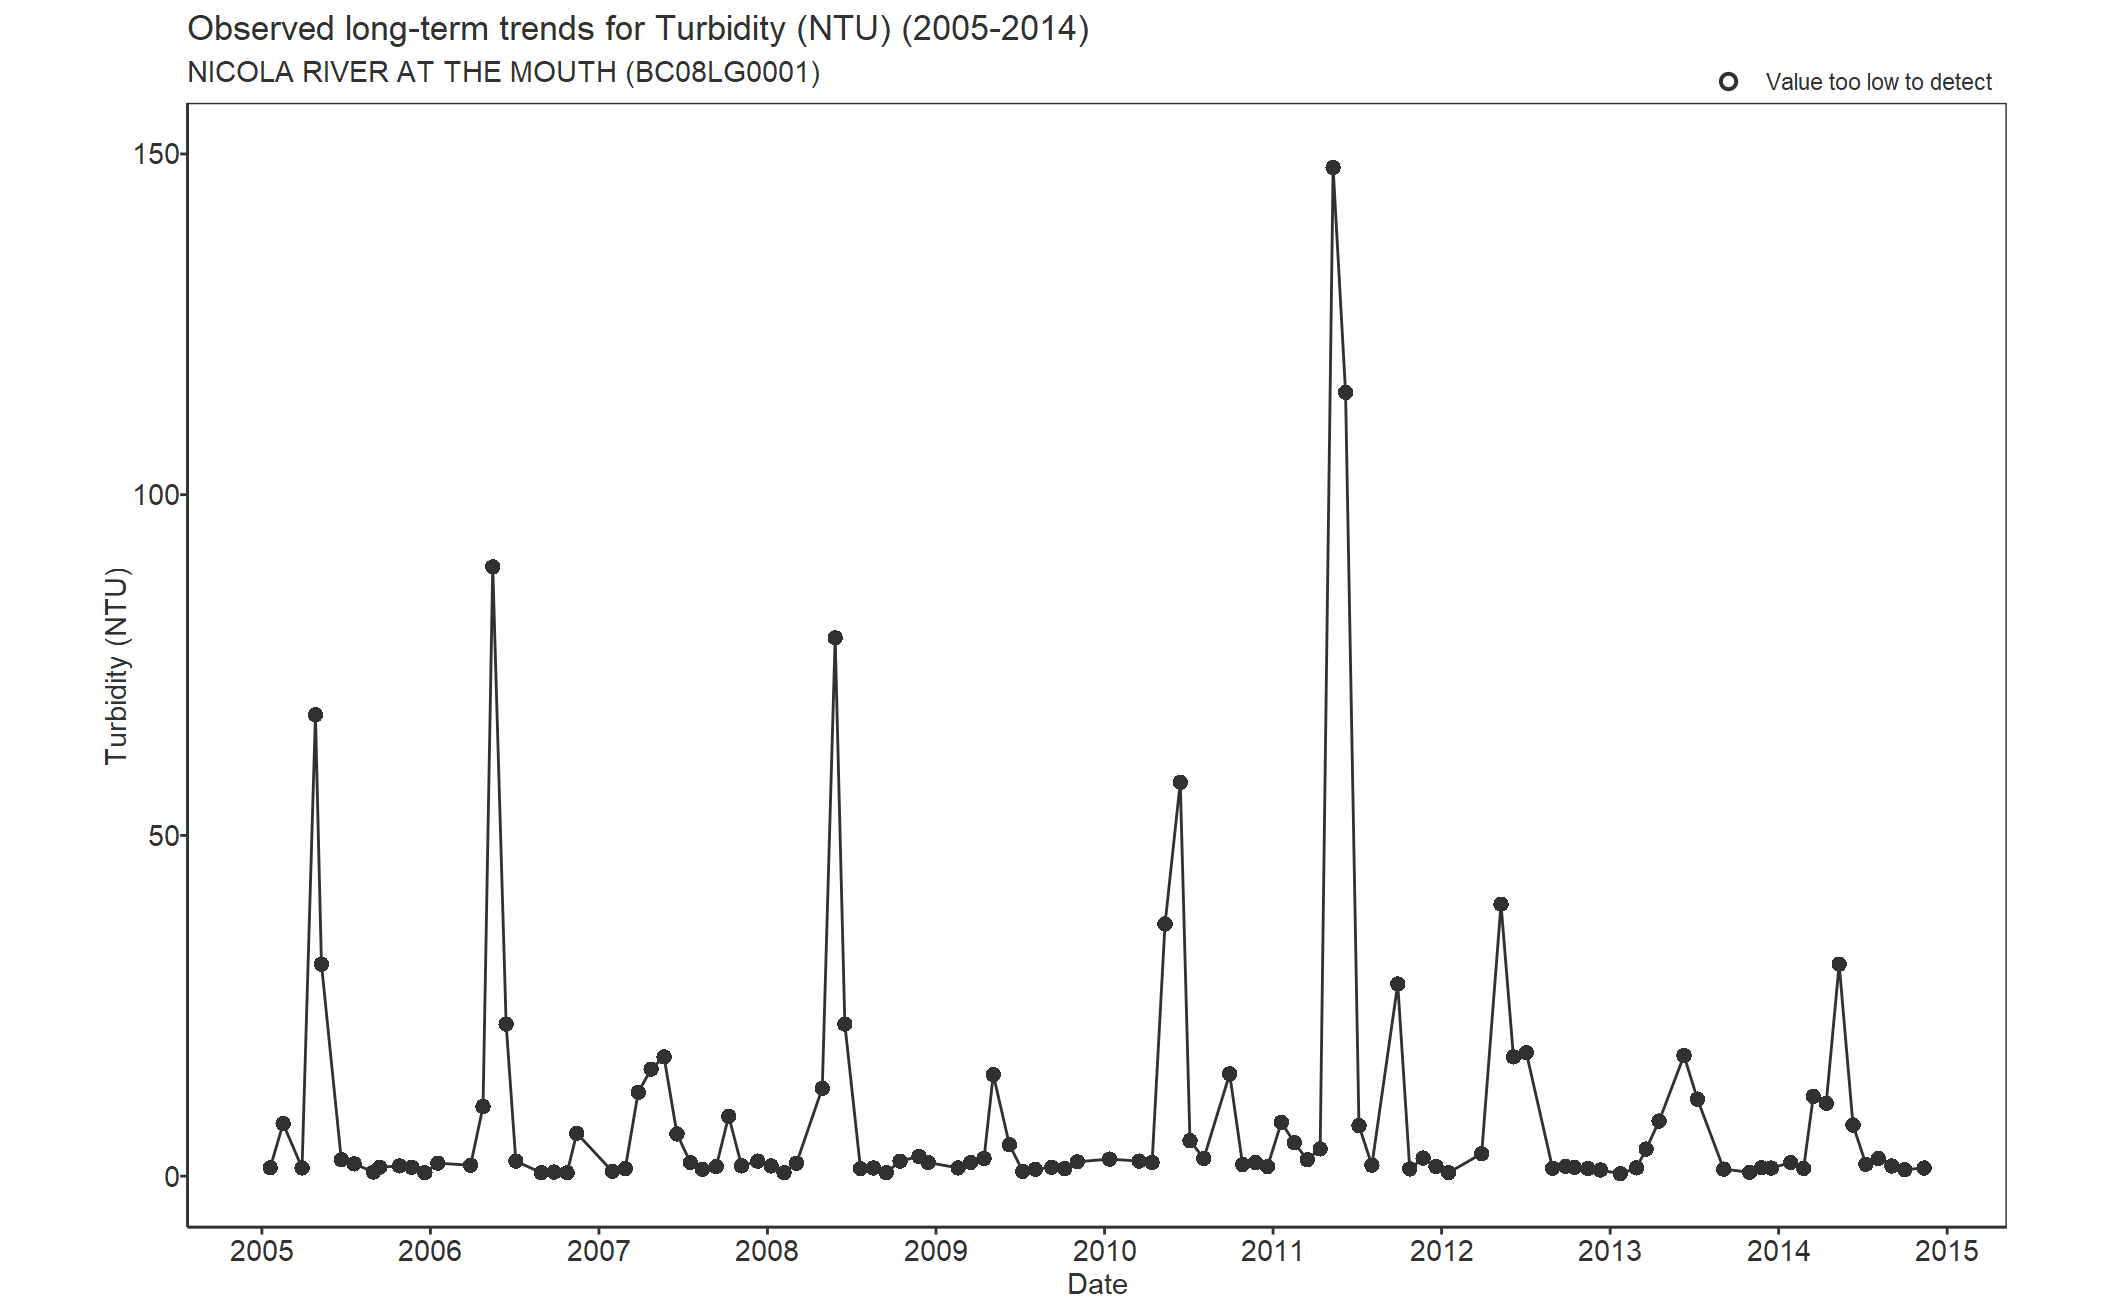 Observed long-term trends for Turbidity (2005-2014)